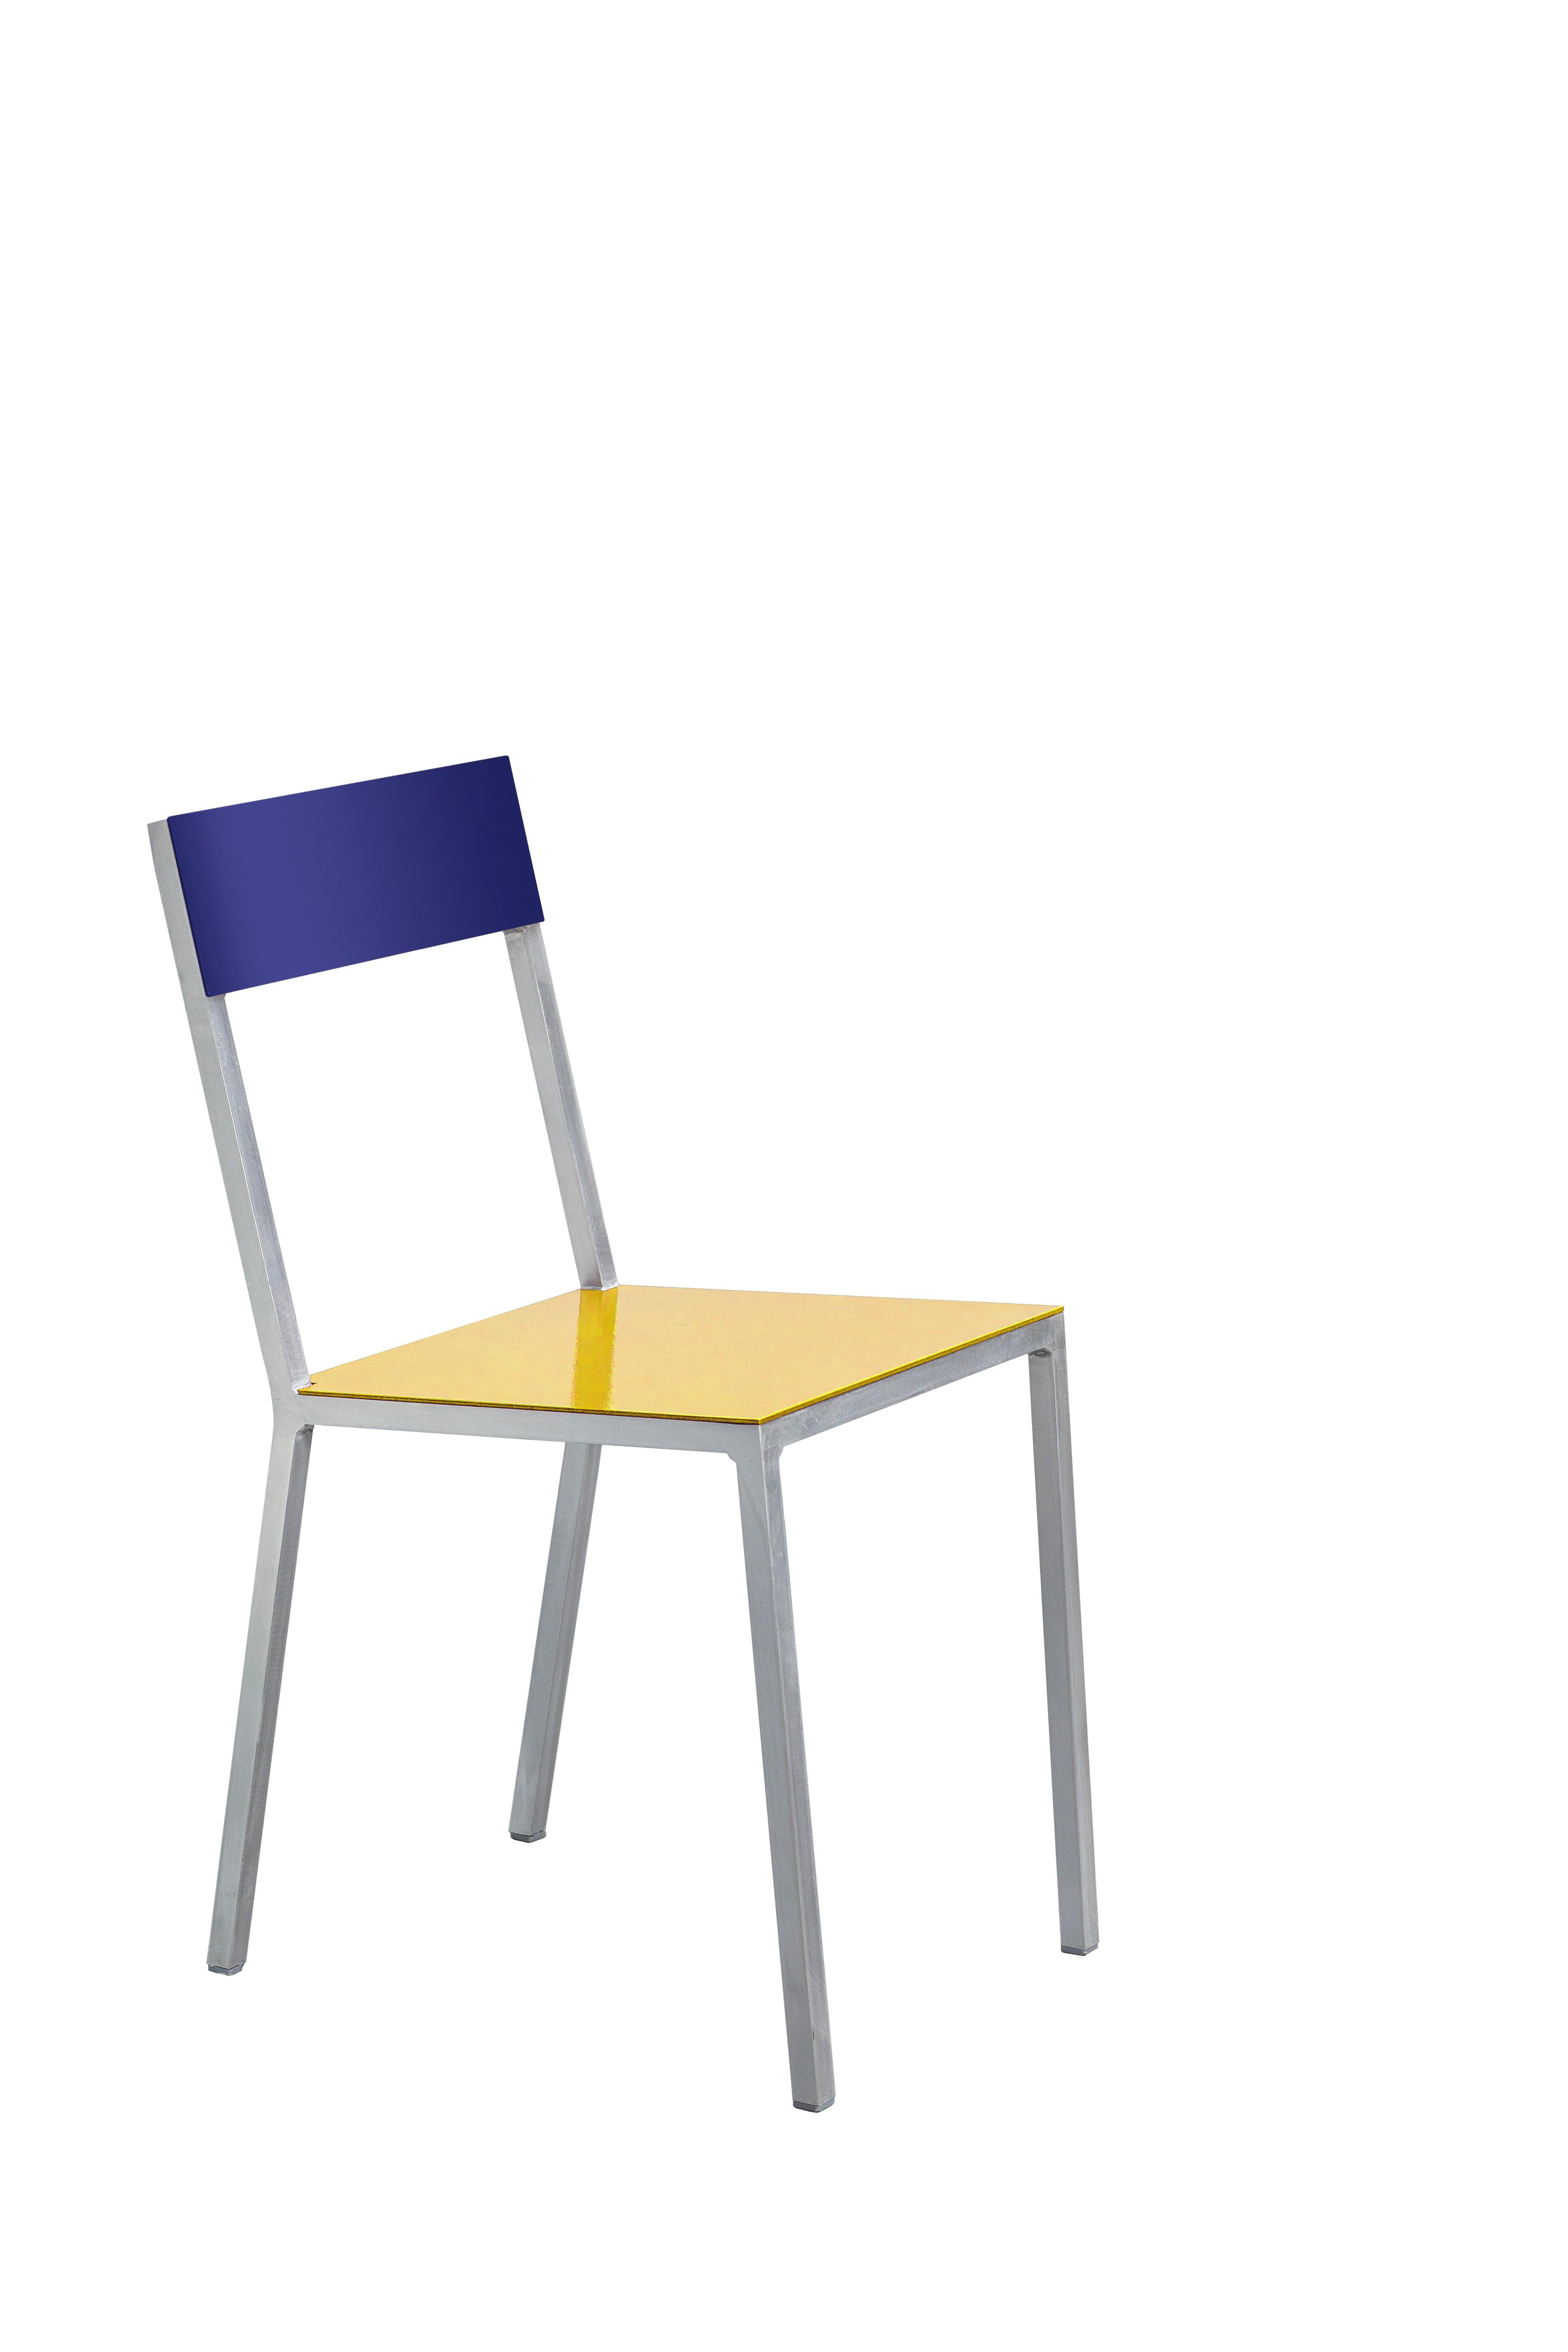 Belgian Contemporary Chair 'ALU' by Muller Van Severen x Valerie Objetcs, Red + Curry For Sale